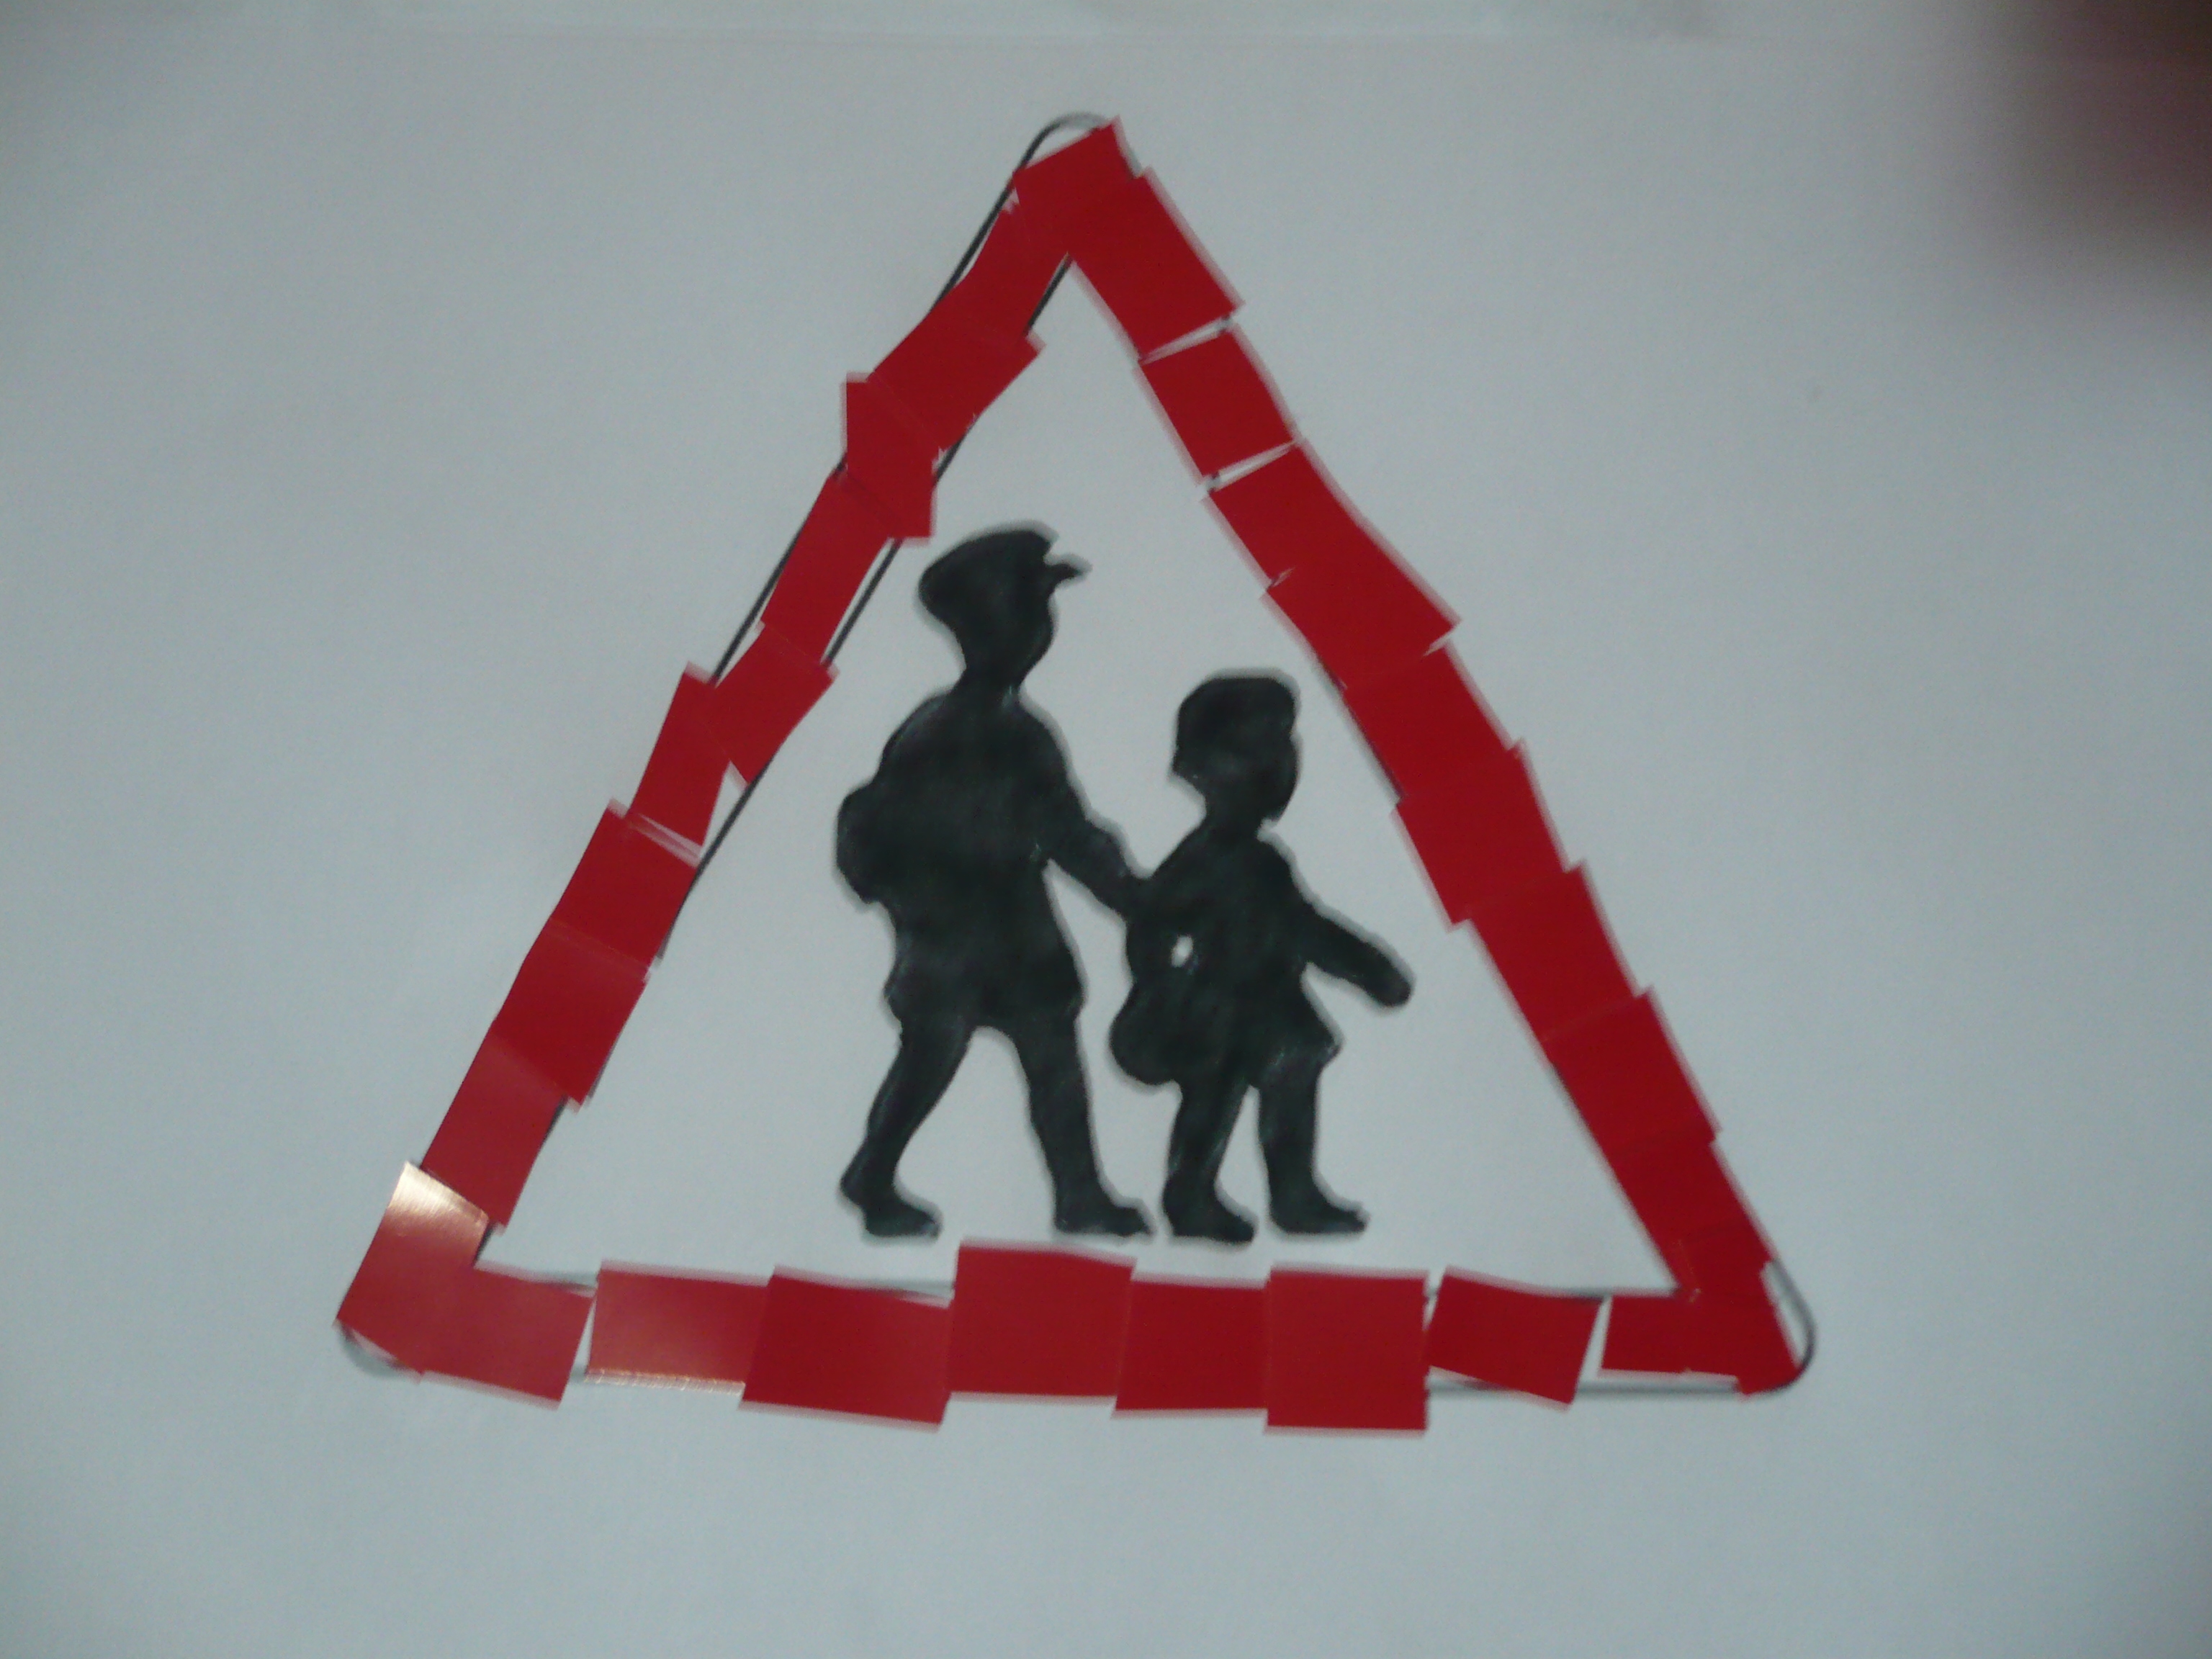 Recognizing Traffic Signs | Fun Family Crafts3072 x 2304